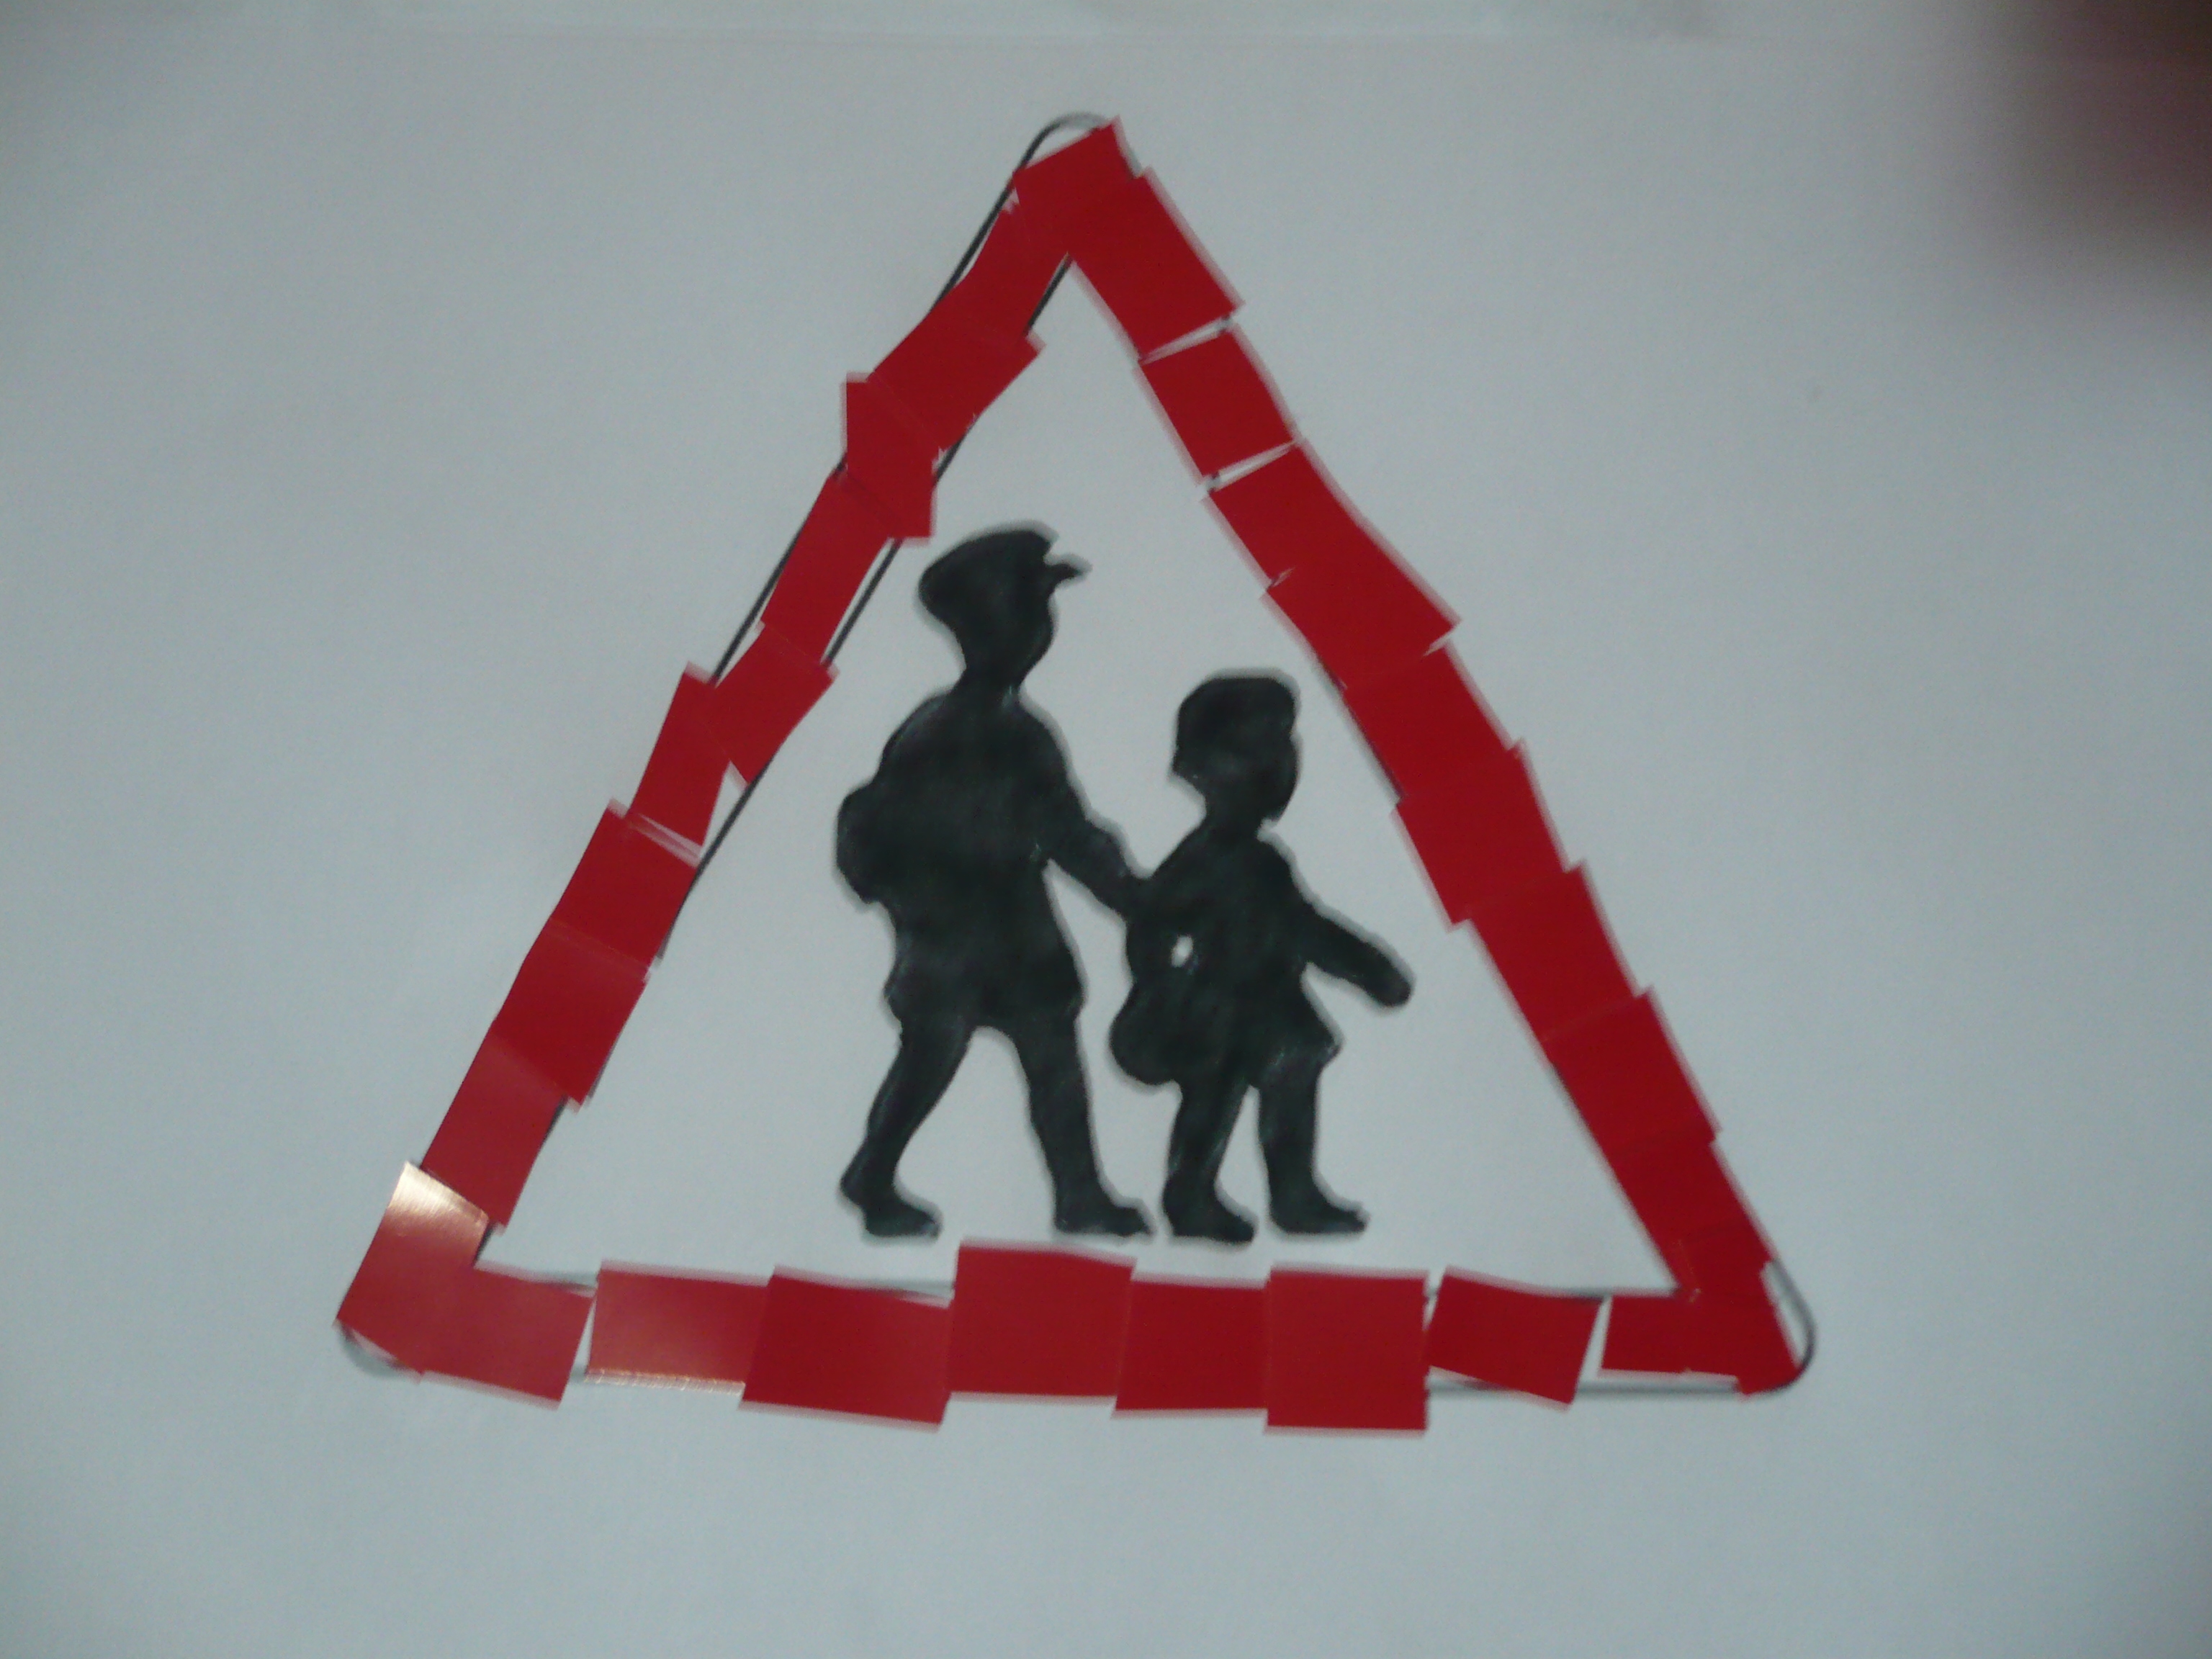 Recognizing Traffic Signs | Fun Family Crafts3072 x 2304